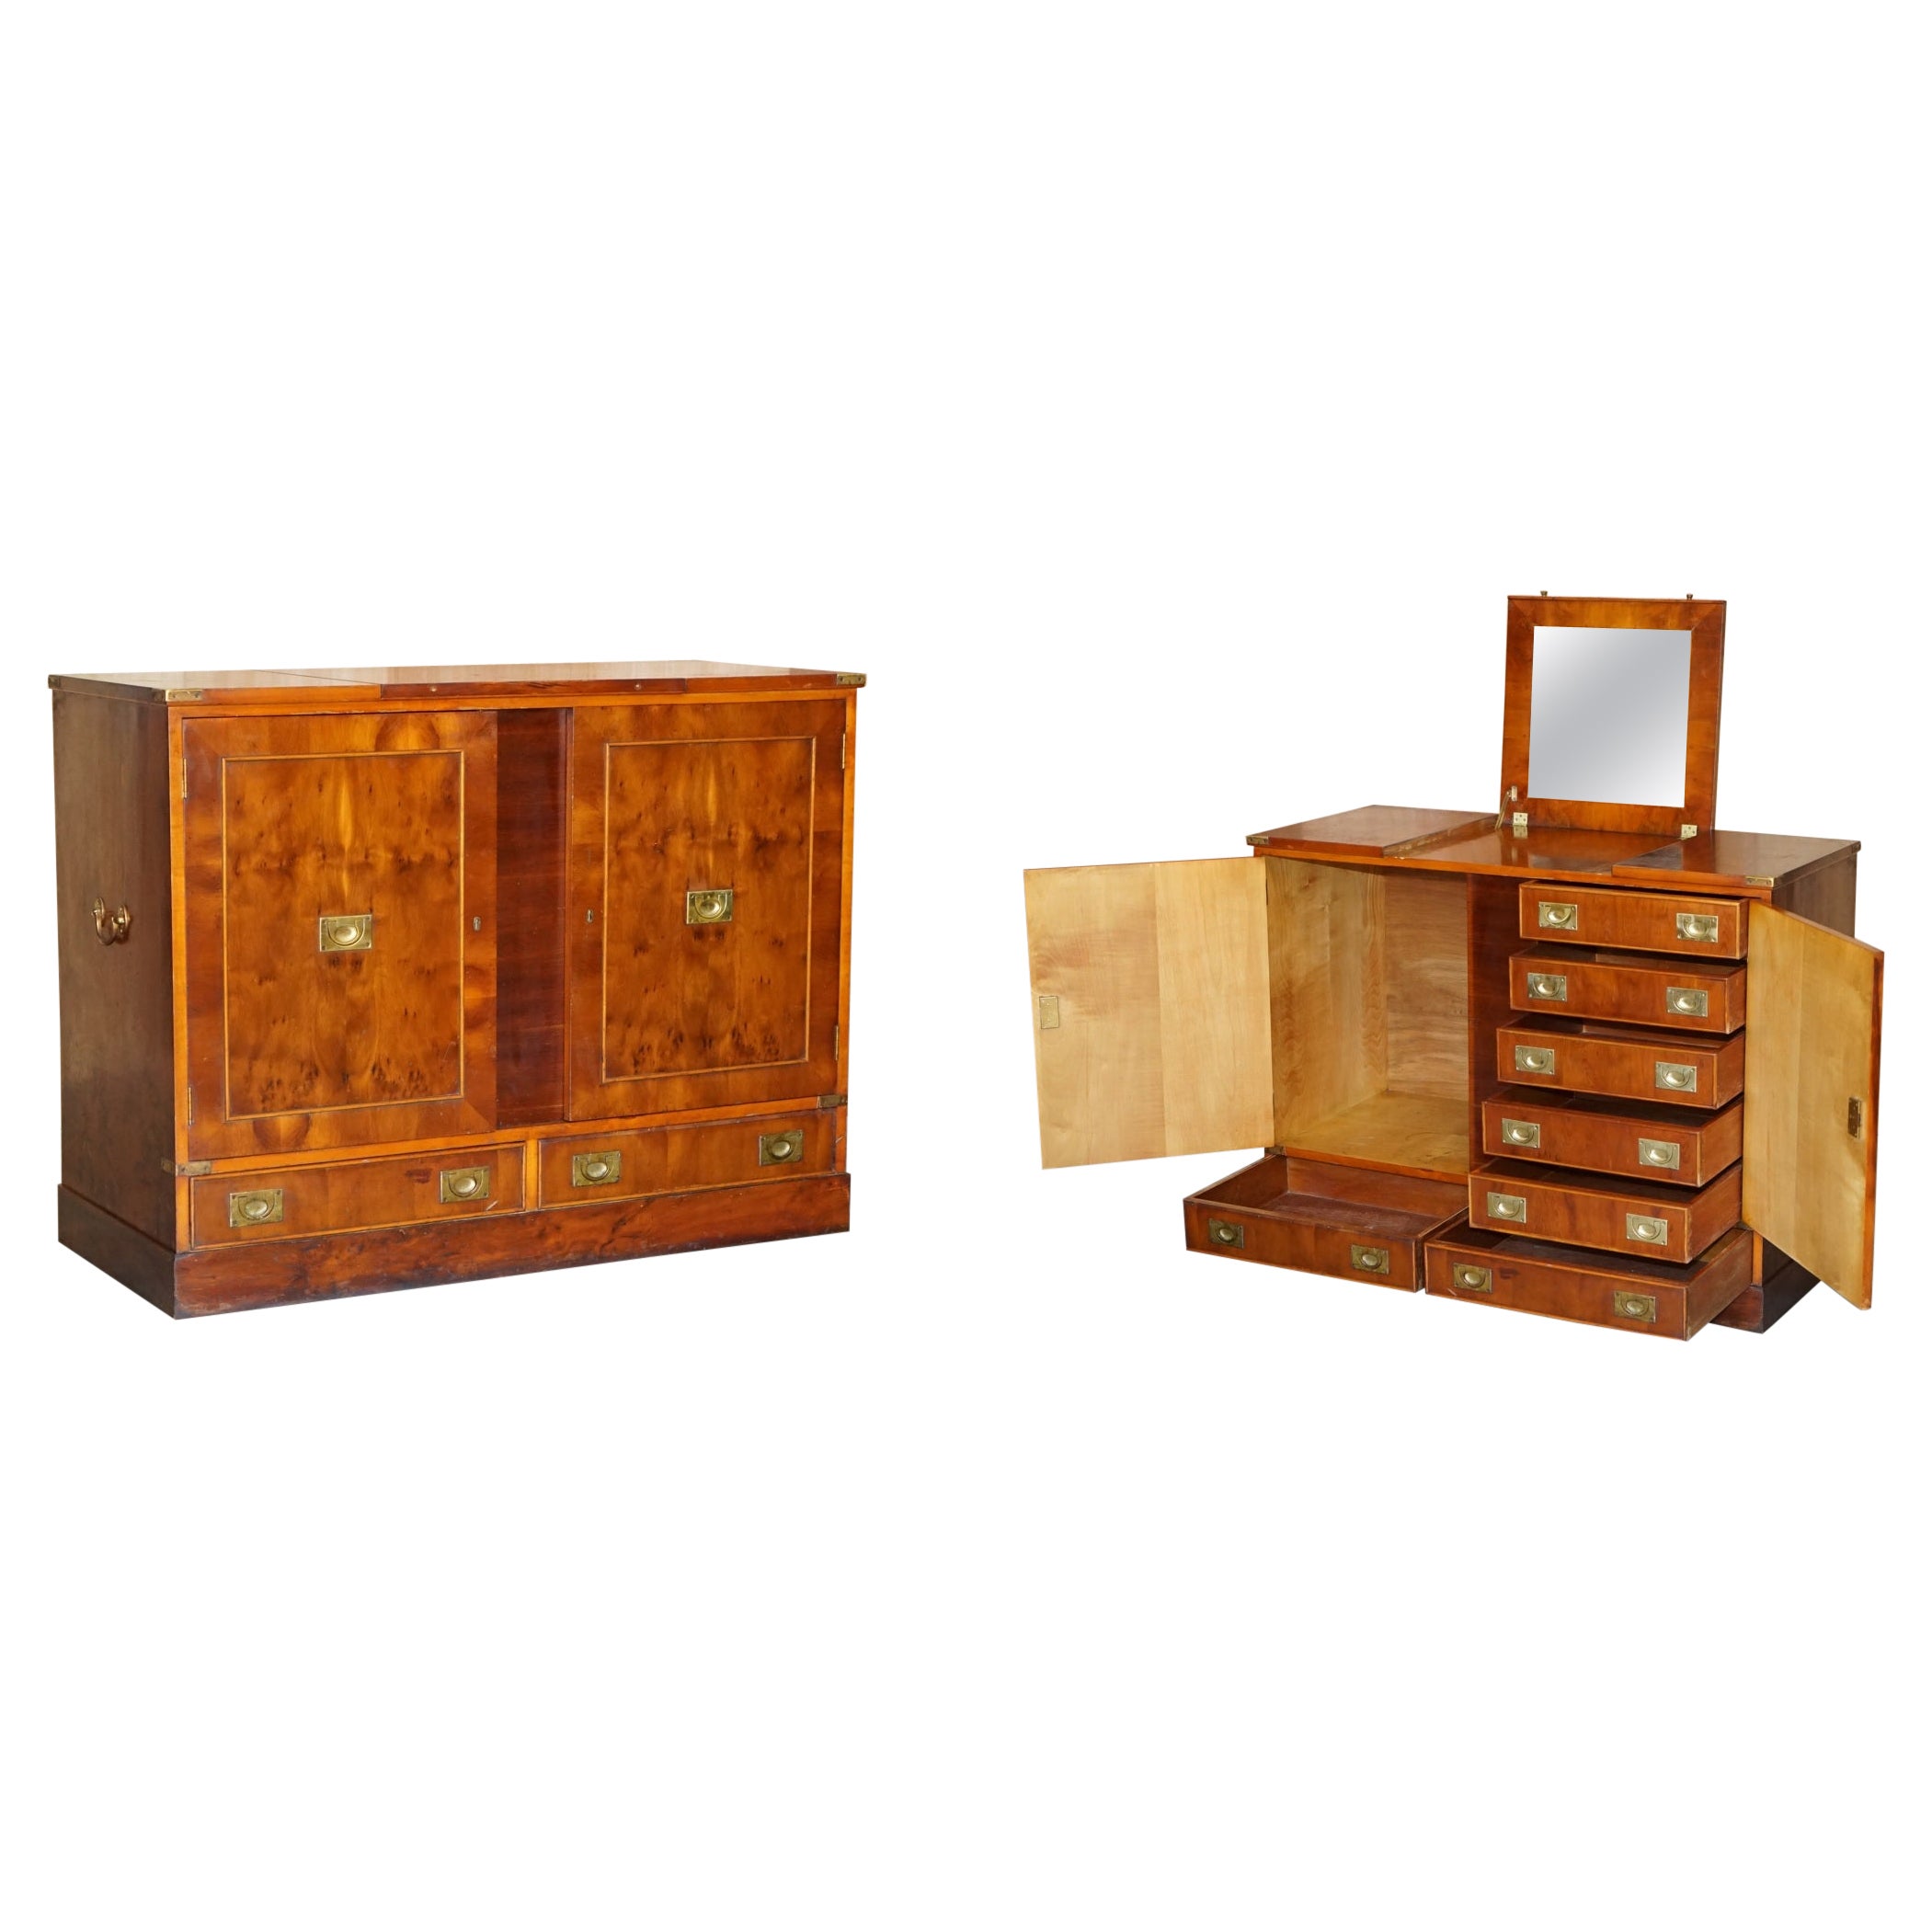 Rare Burr Yew Wood Military Campaign Gentleman's Dressing Table Chest of Drawers For Sale